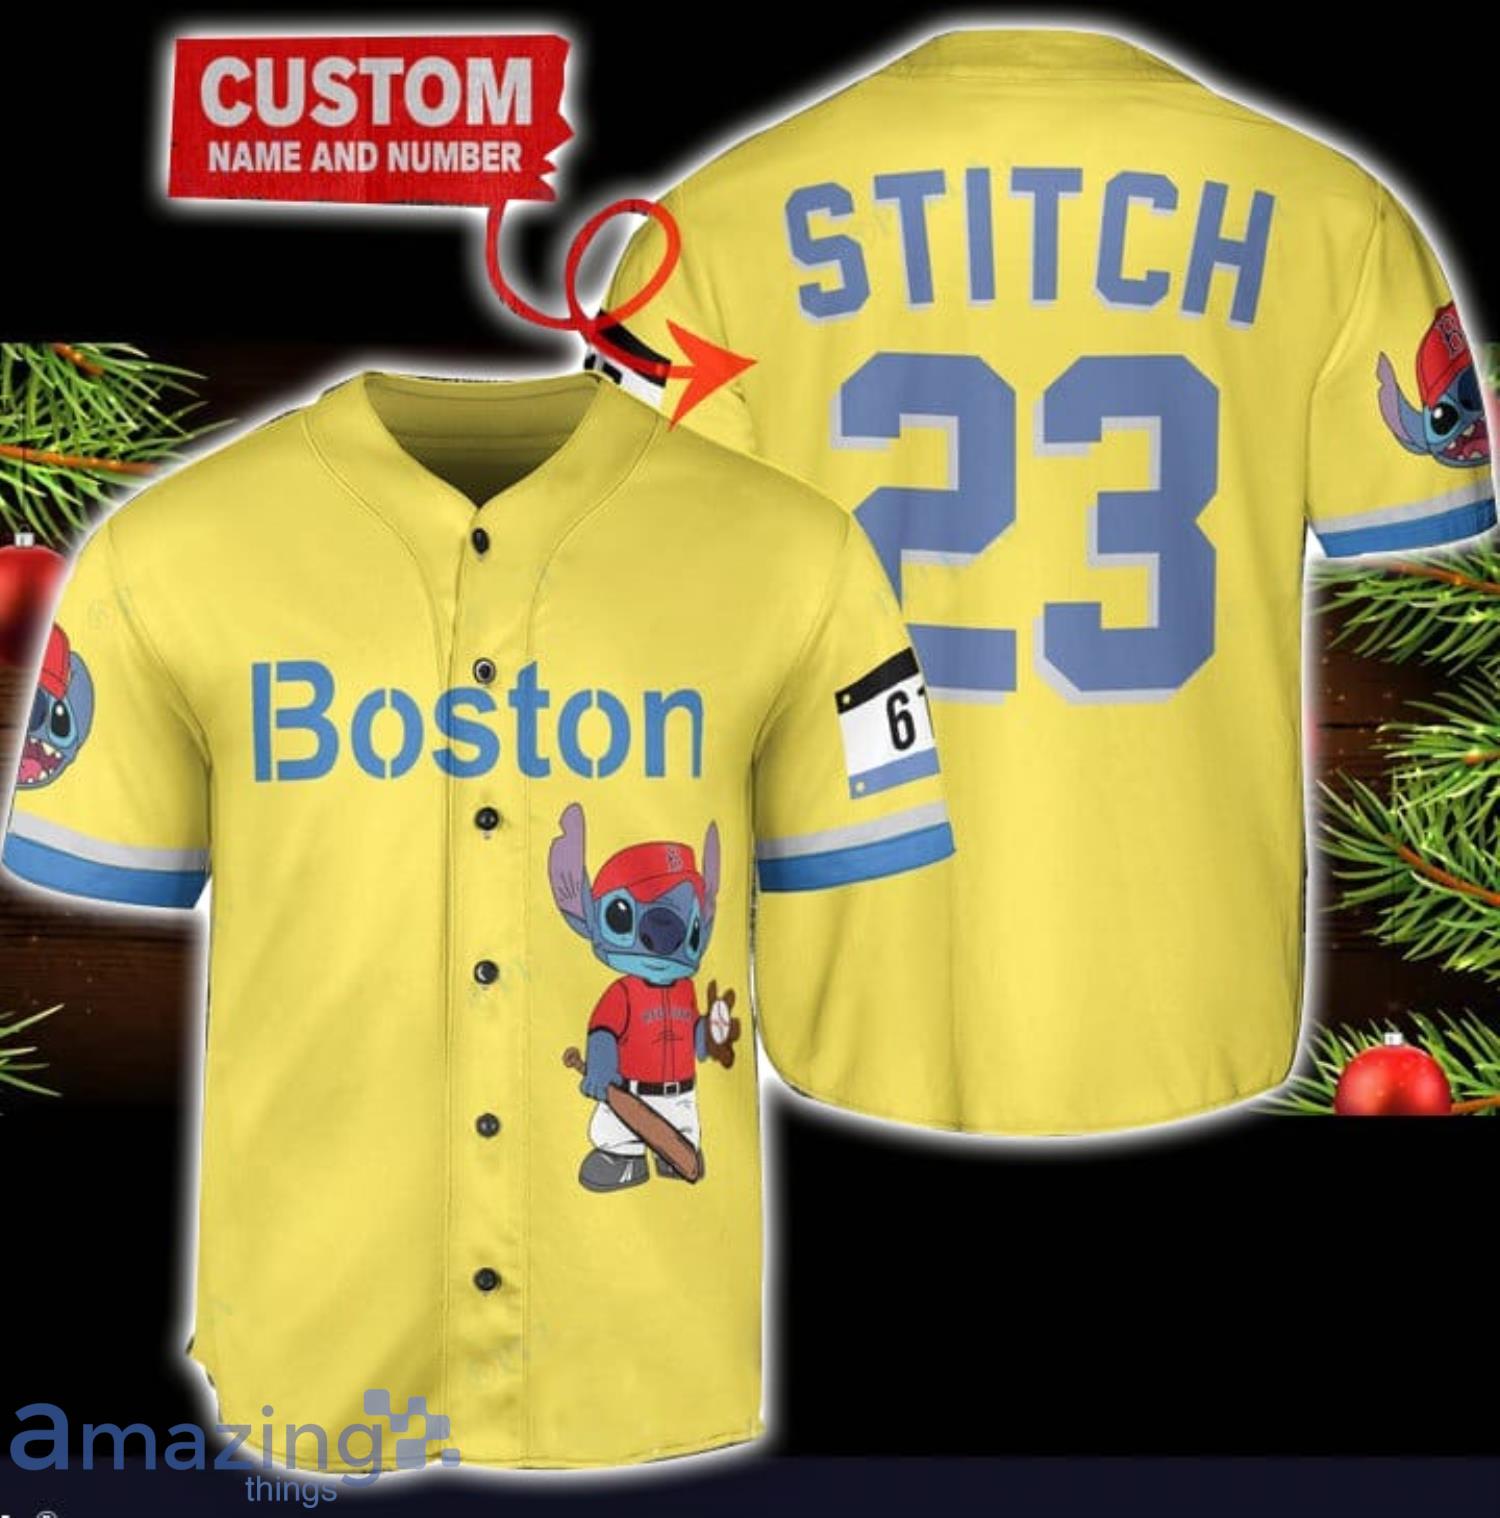 Boston Red Sox MLB Baseball Jersey Shirt Custom Name And Number For Fans